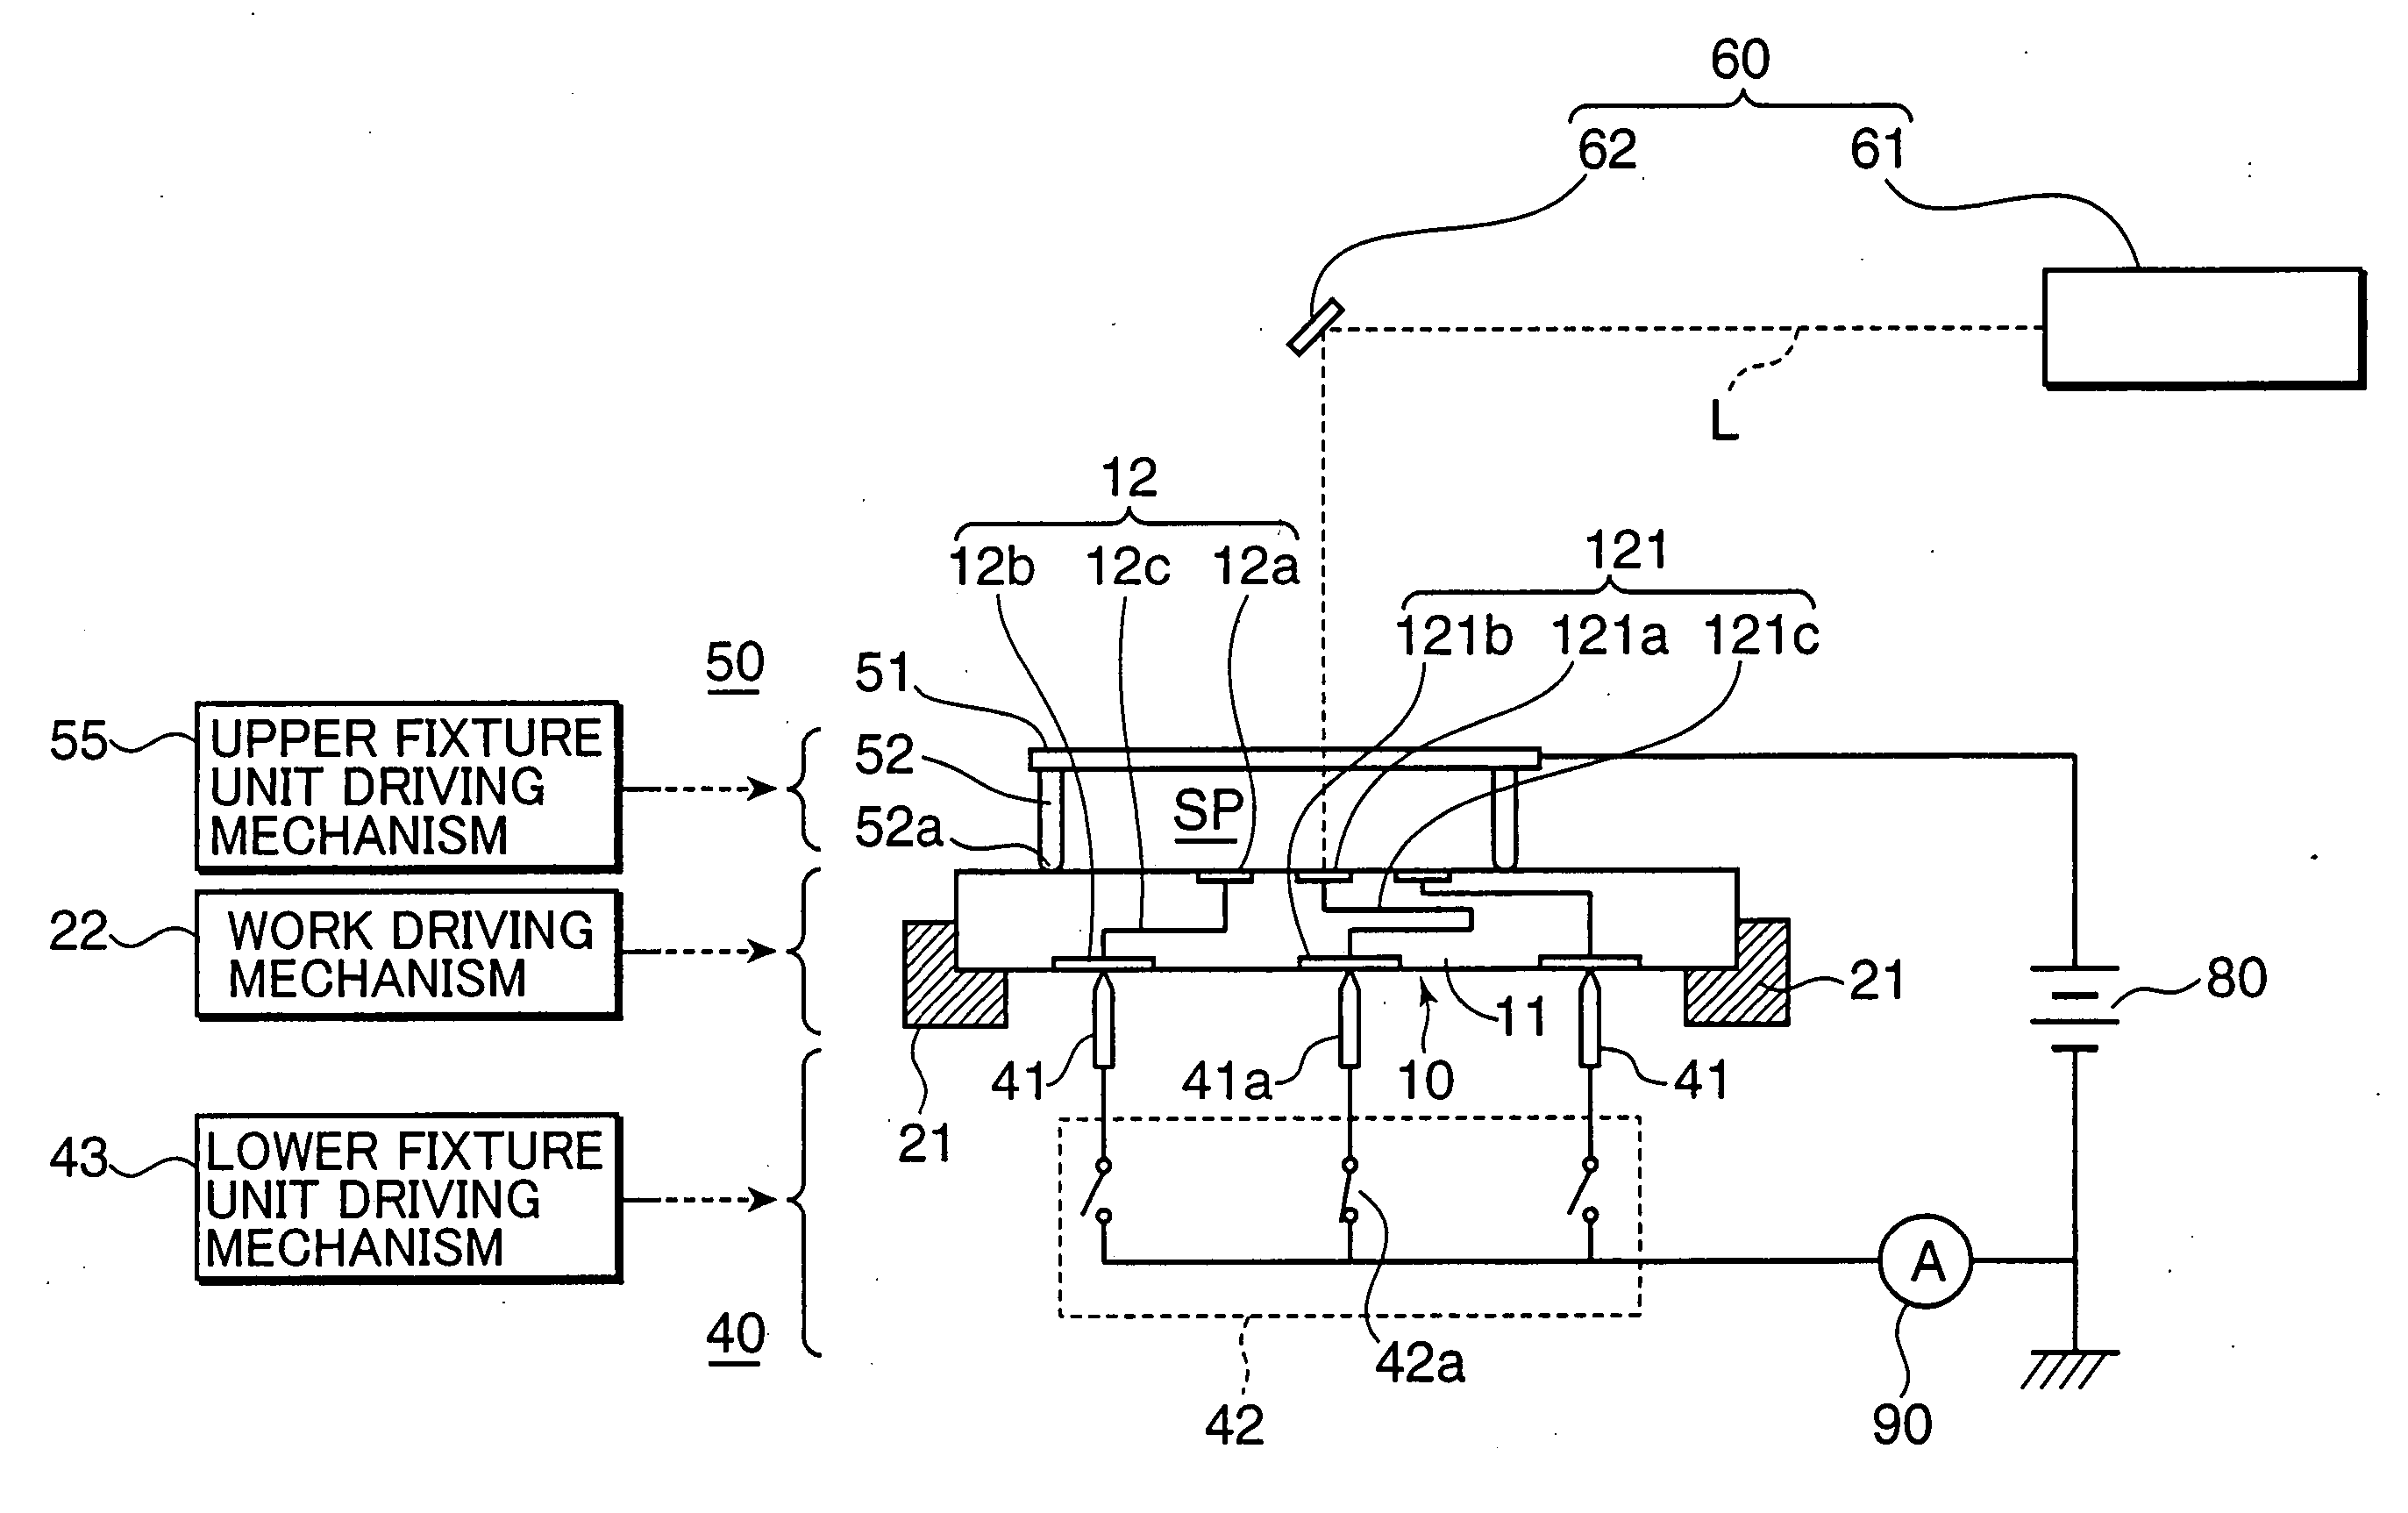 Circuit board testing apparatus and method for testing a circuit board